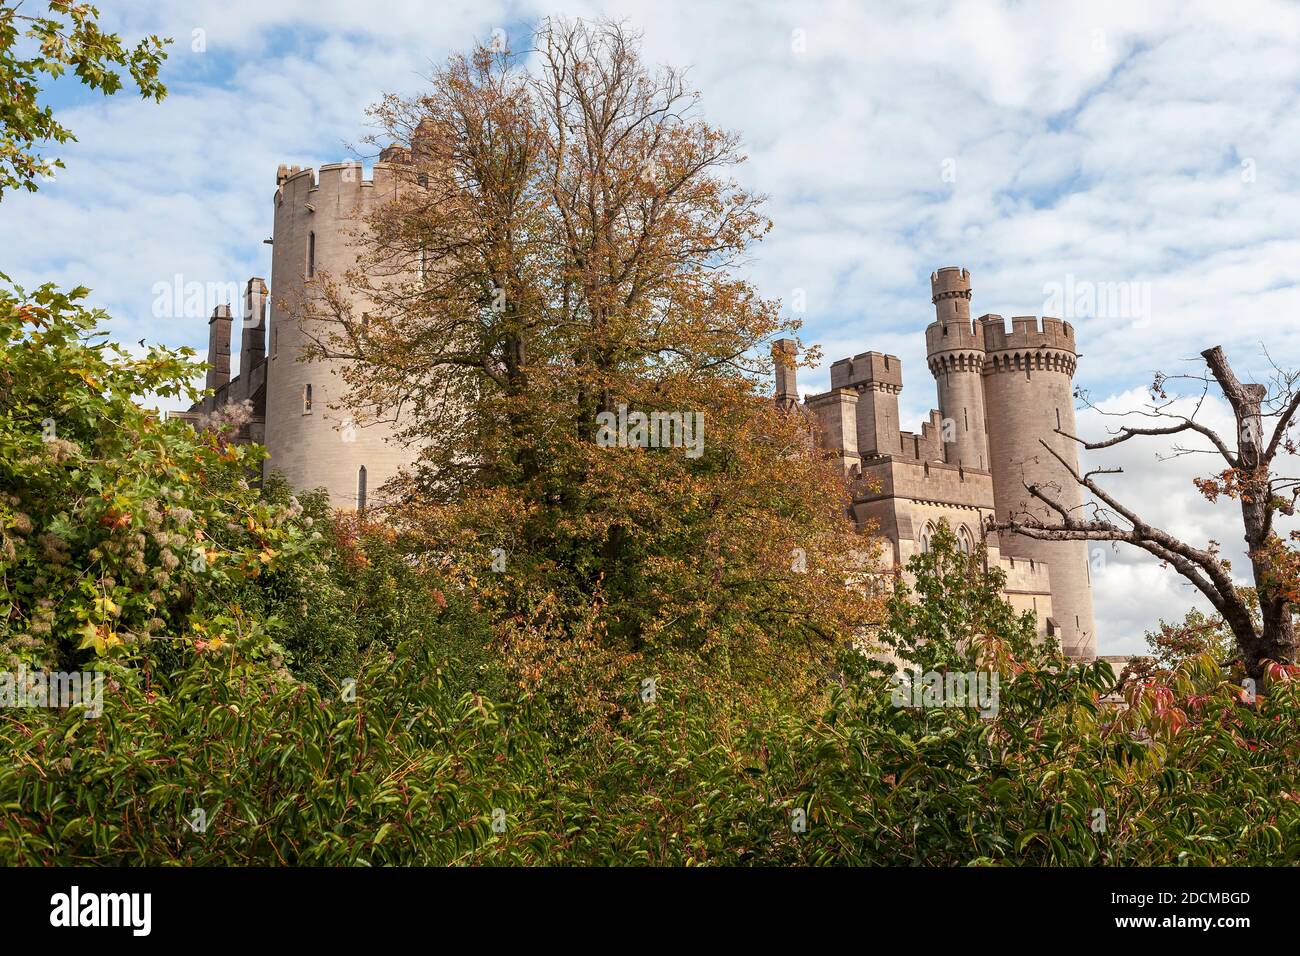 The western elevation of the spectacular Arundel Castle, Arundel, West Sussex, England, UK, from the Gardens Stock Photo